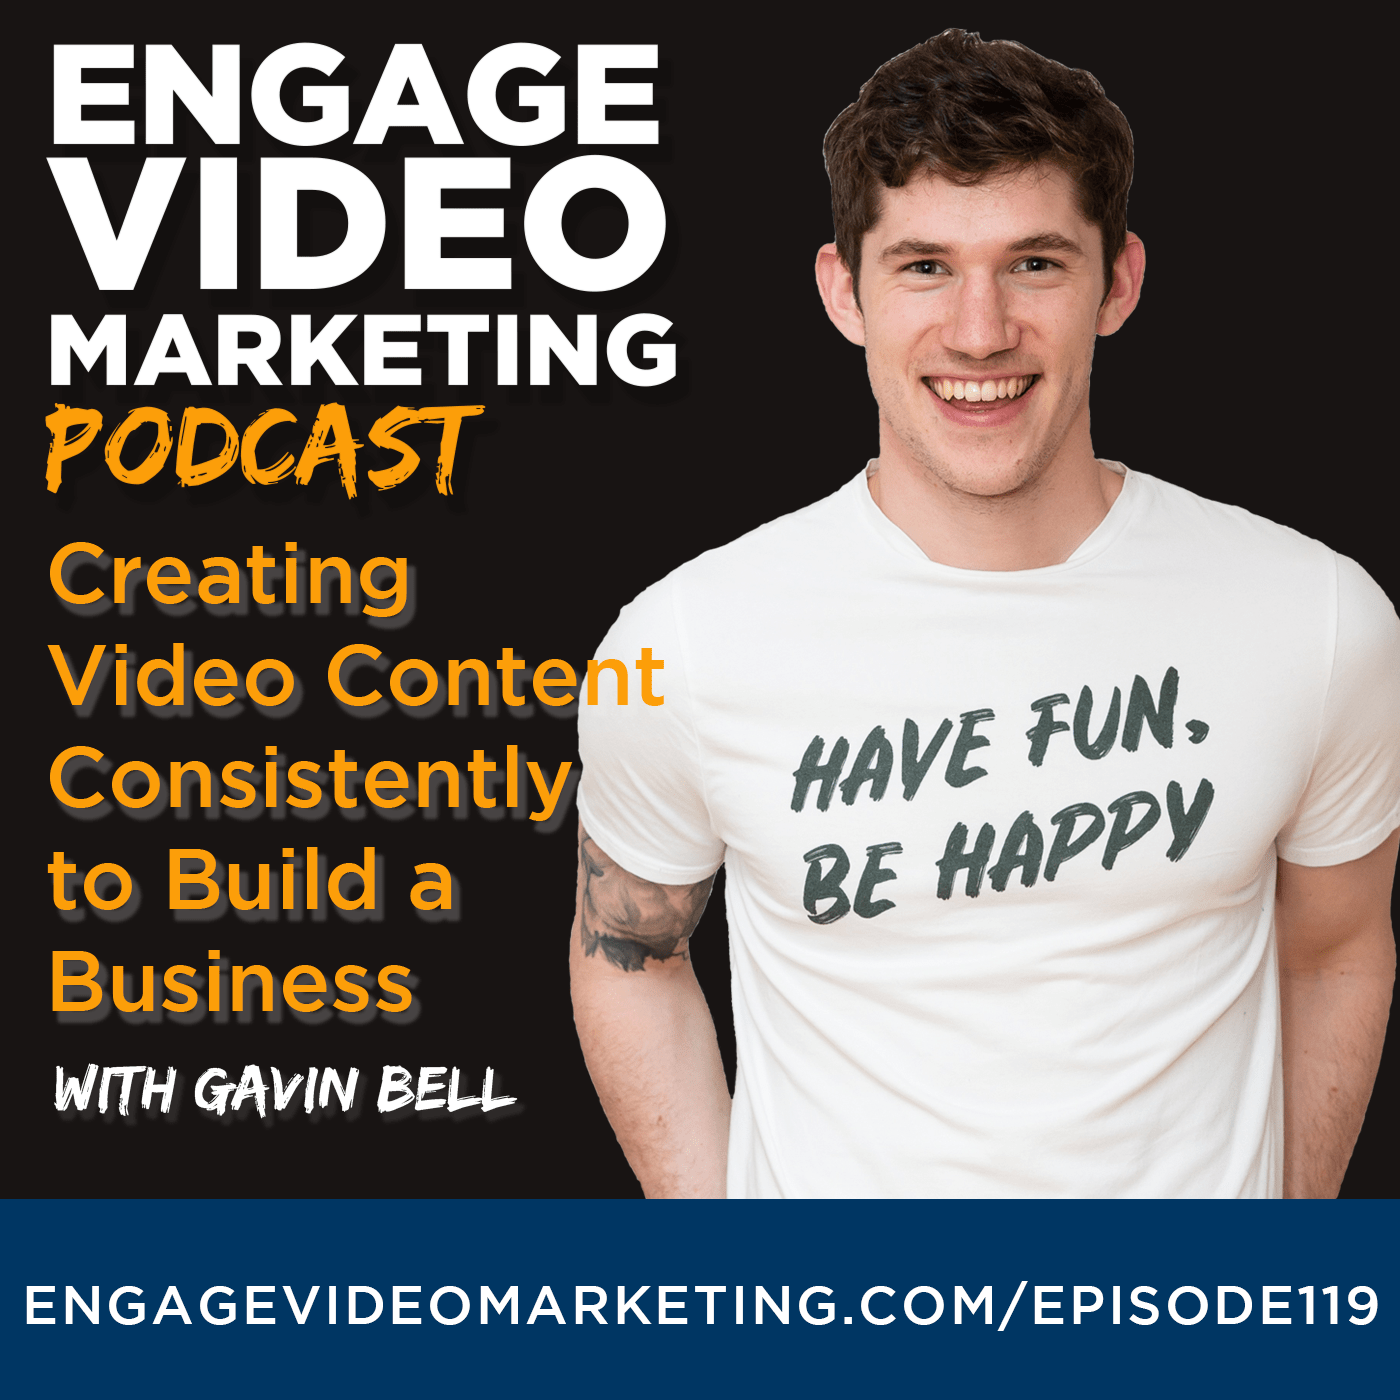 Creating Video Content Consistently to Build a Business with Gavin Bell